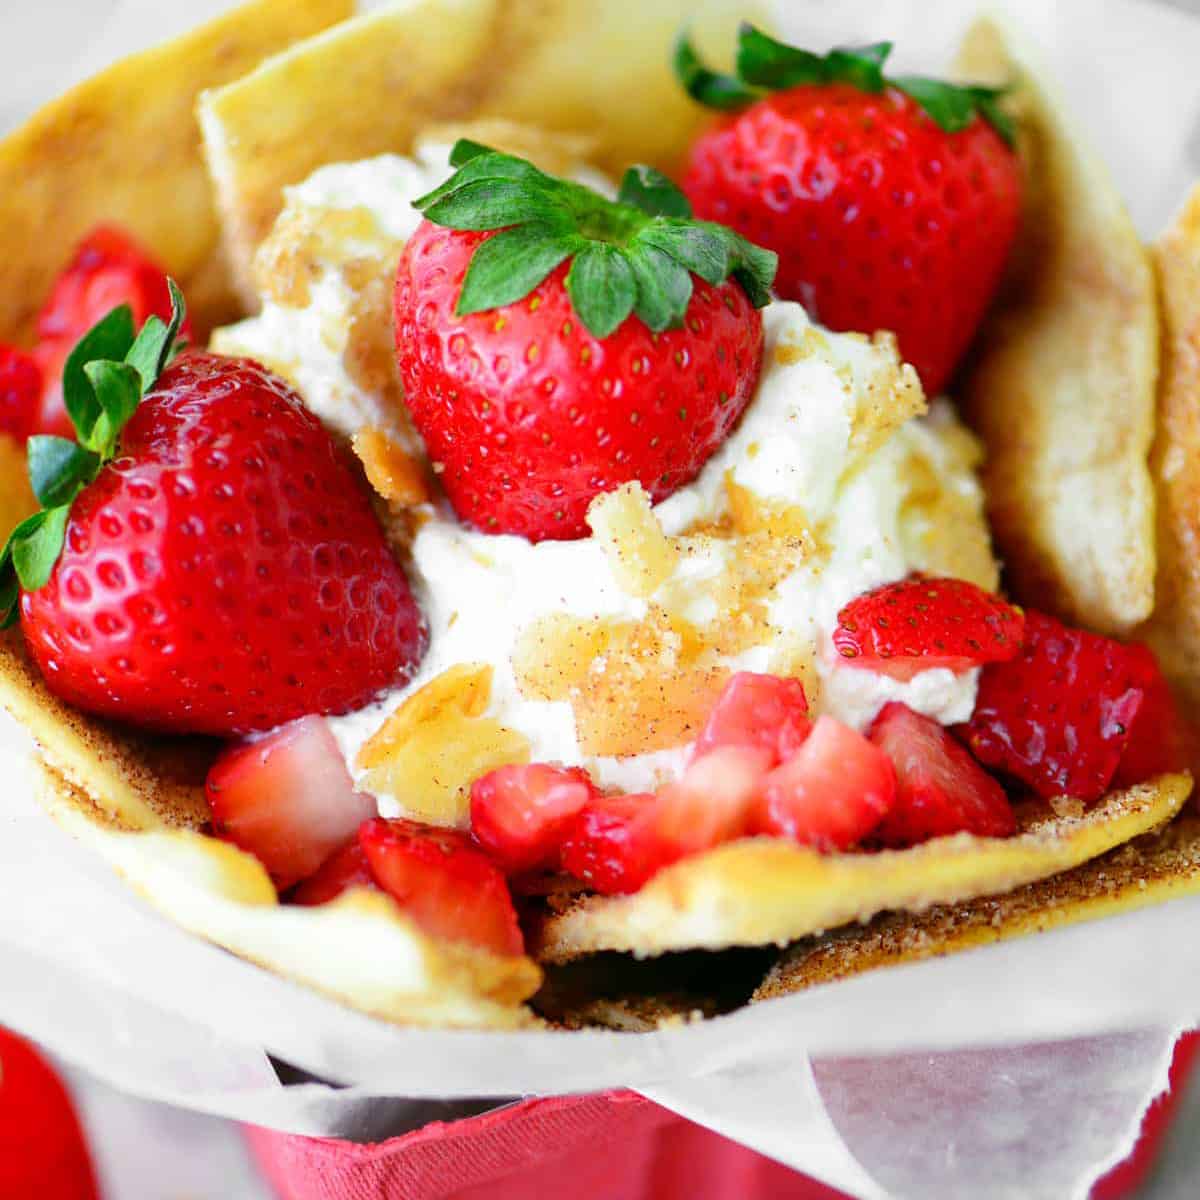 strawberries, whipped cream, and cinnamon chips in a red berry basket.